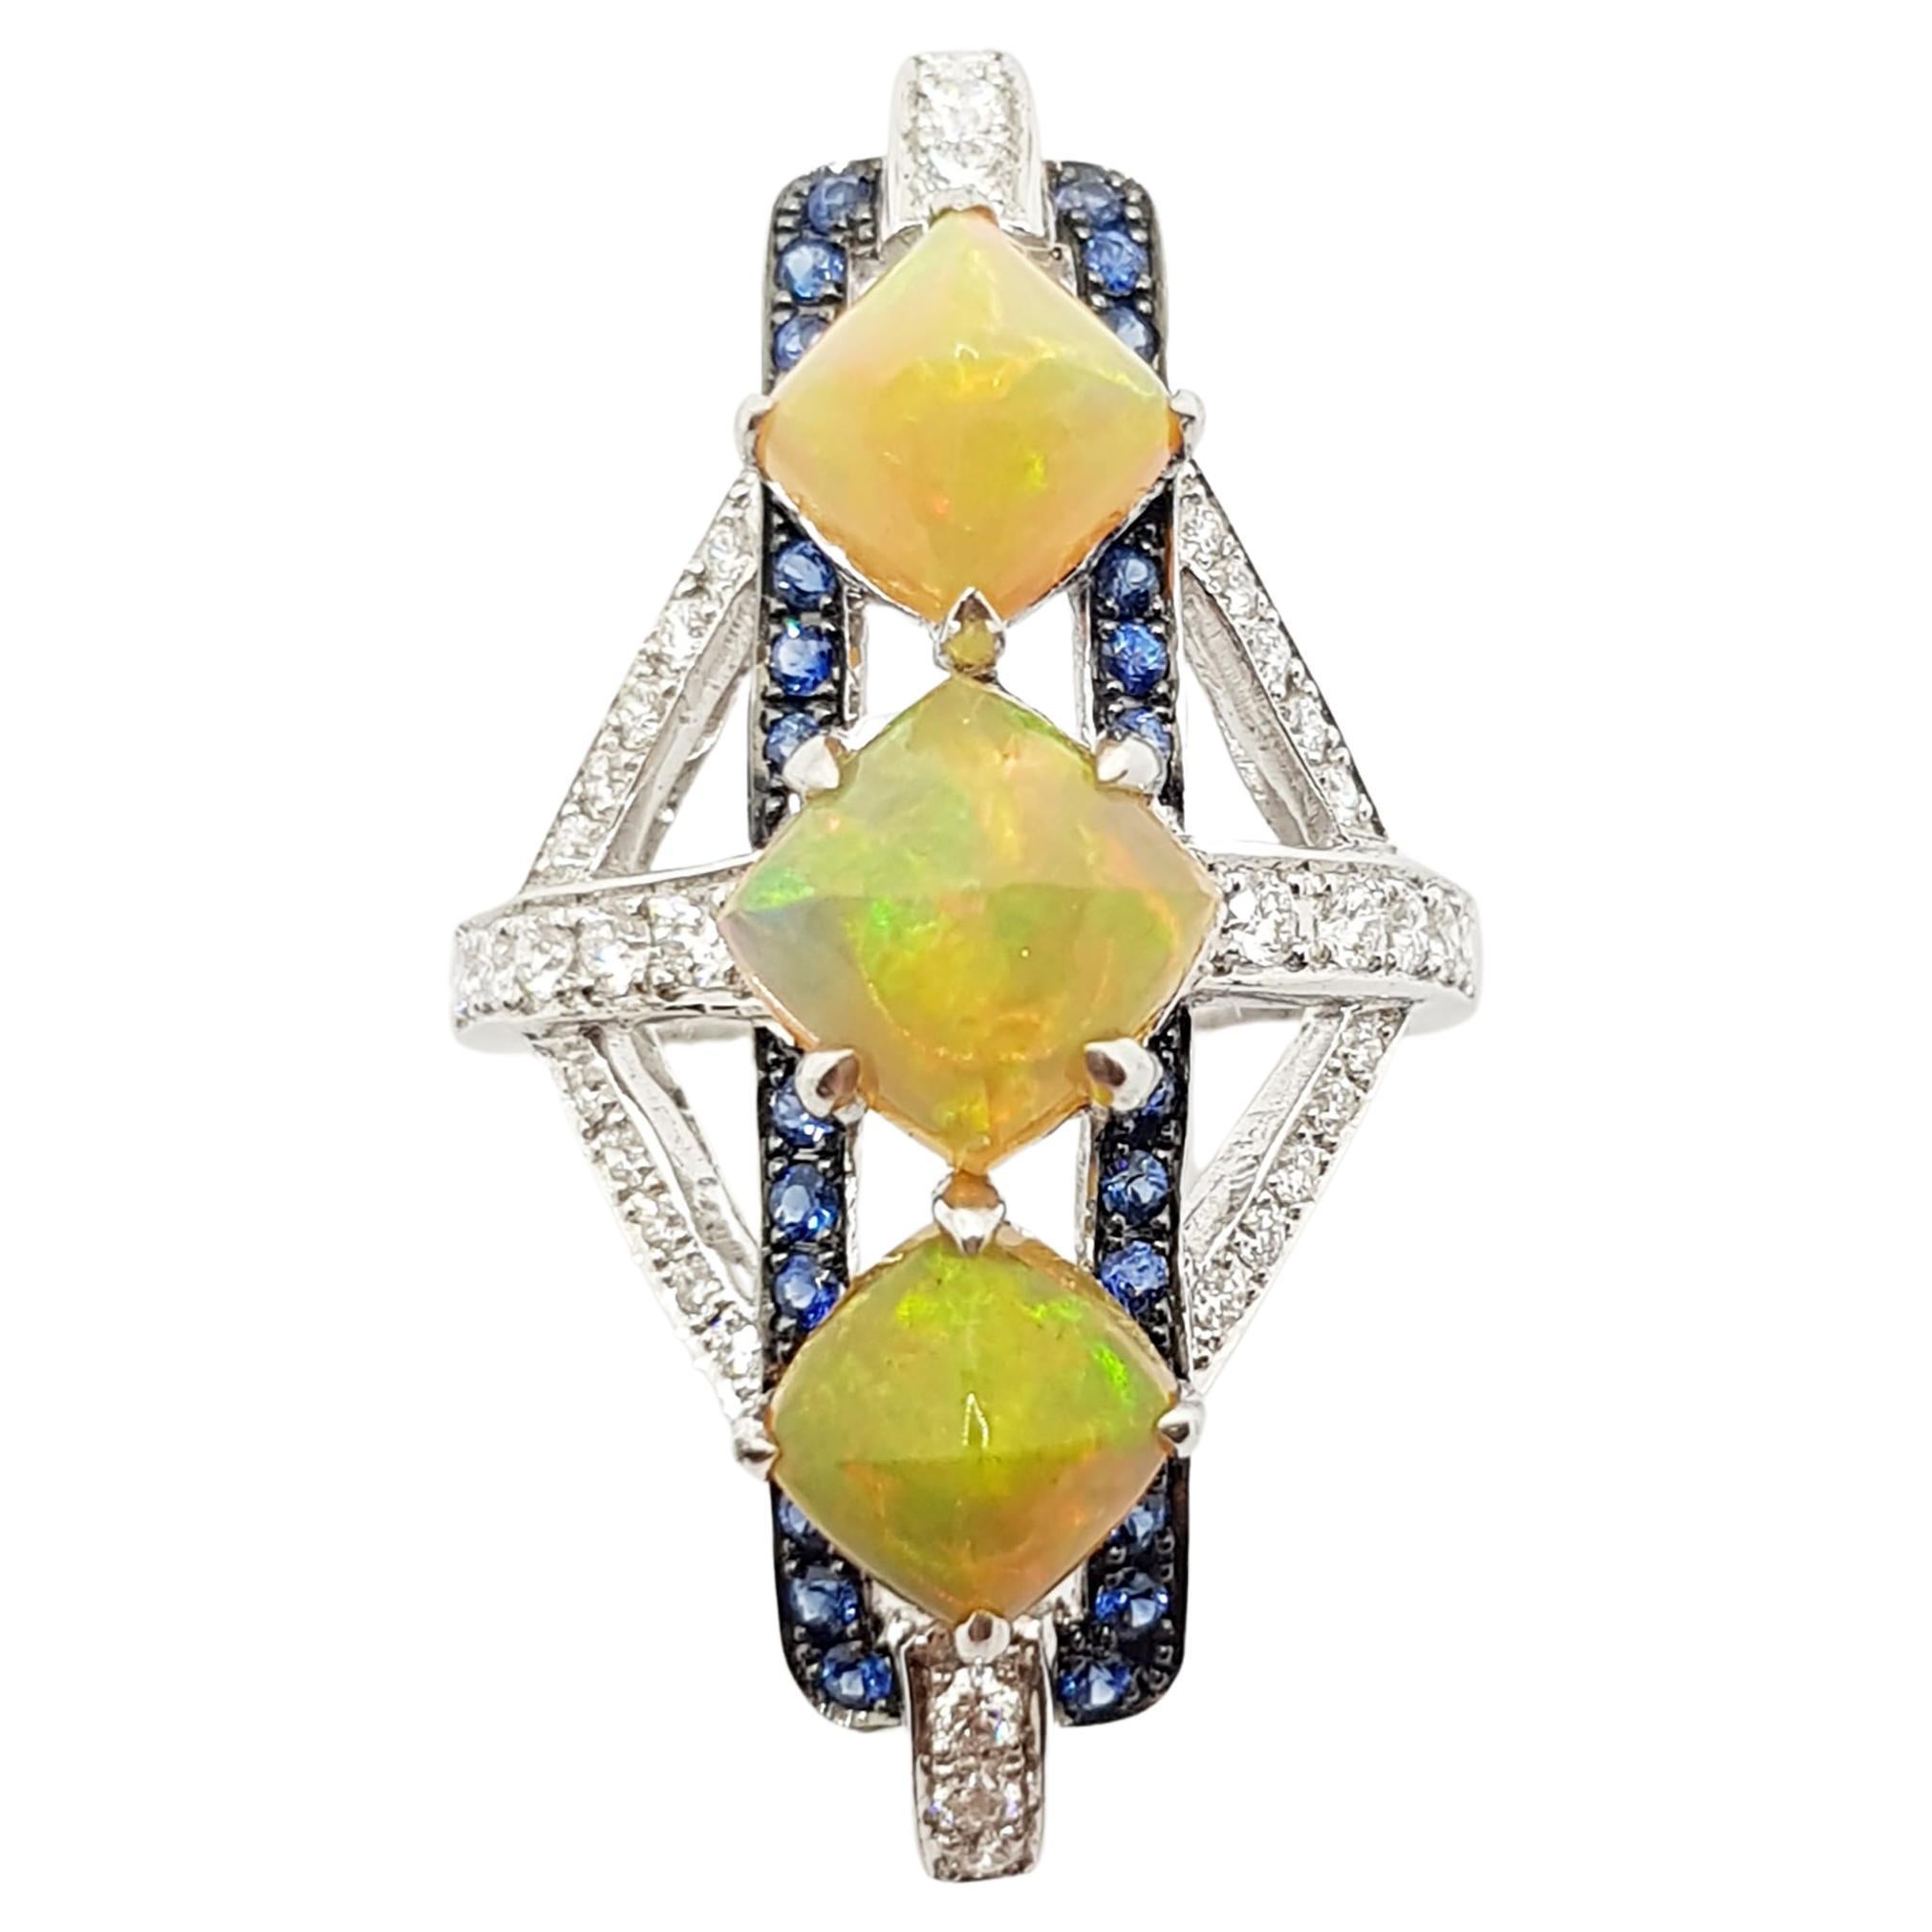 Opal with Blue Sapphire and Diamond Ring Set in 18 Karat White Gold Settings